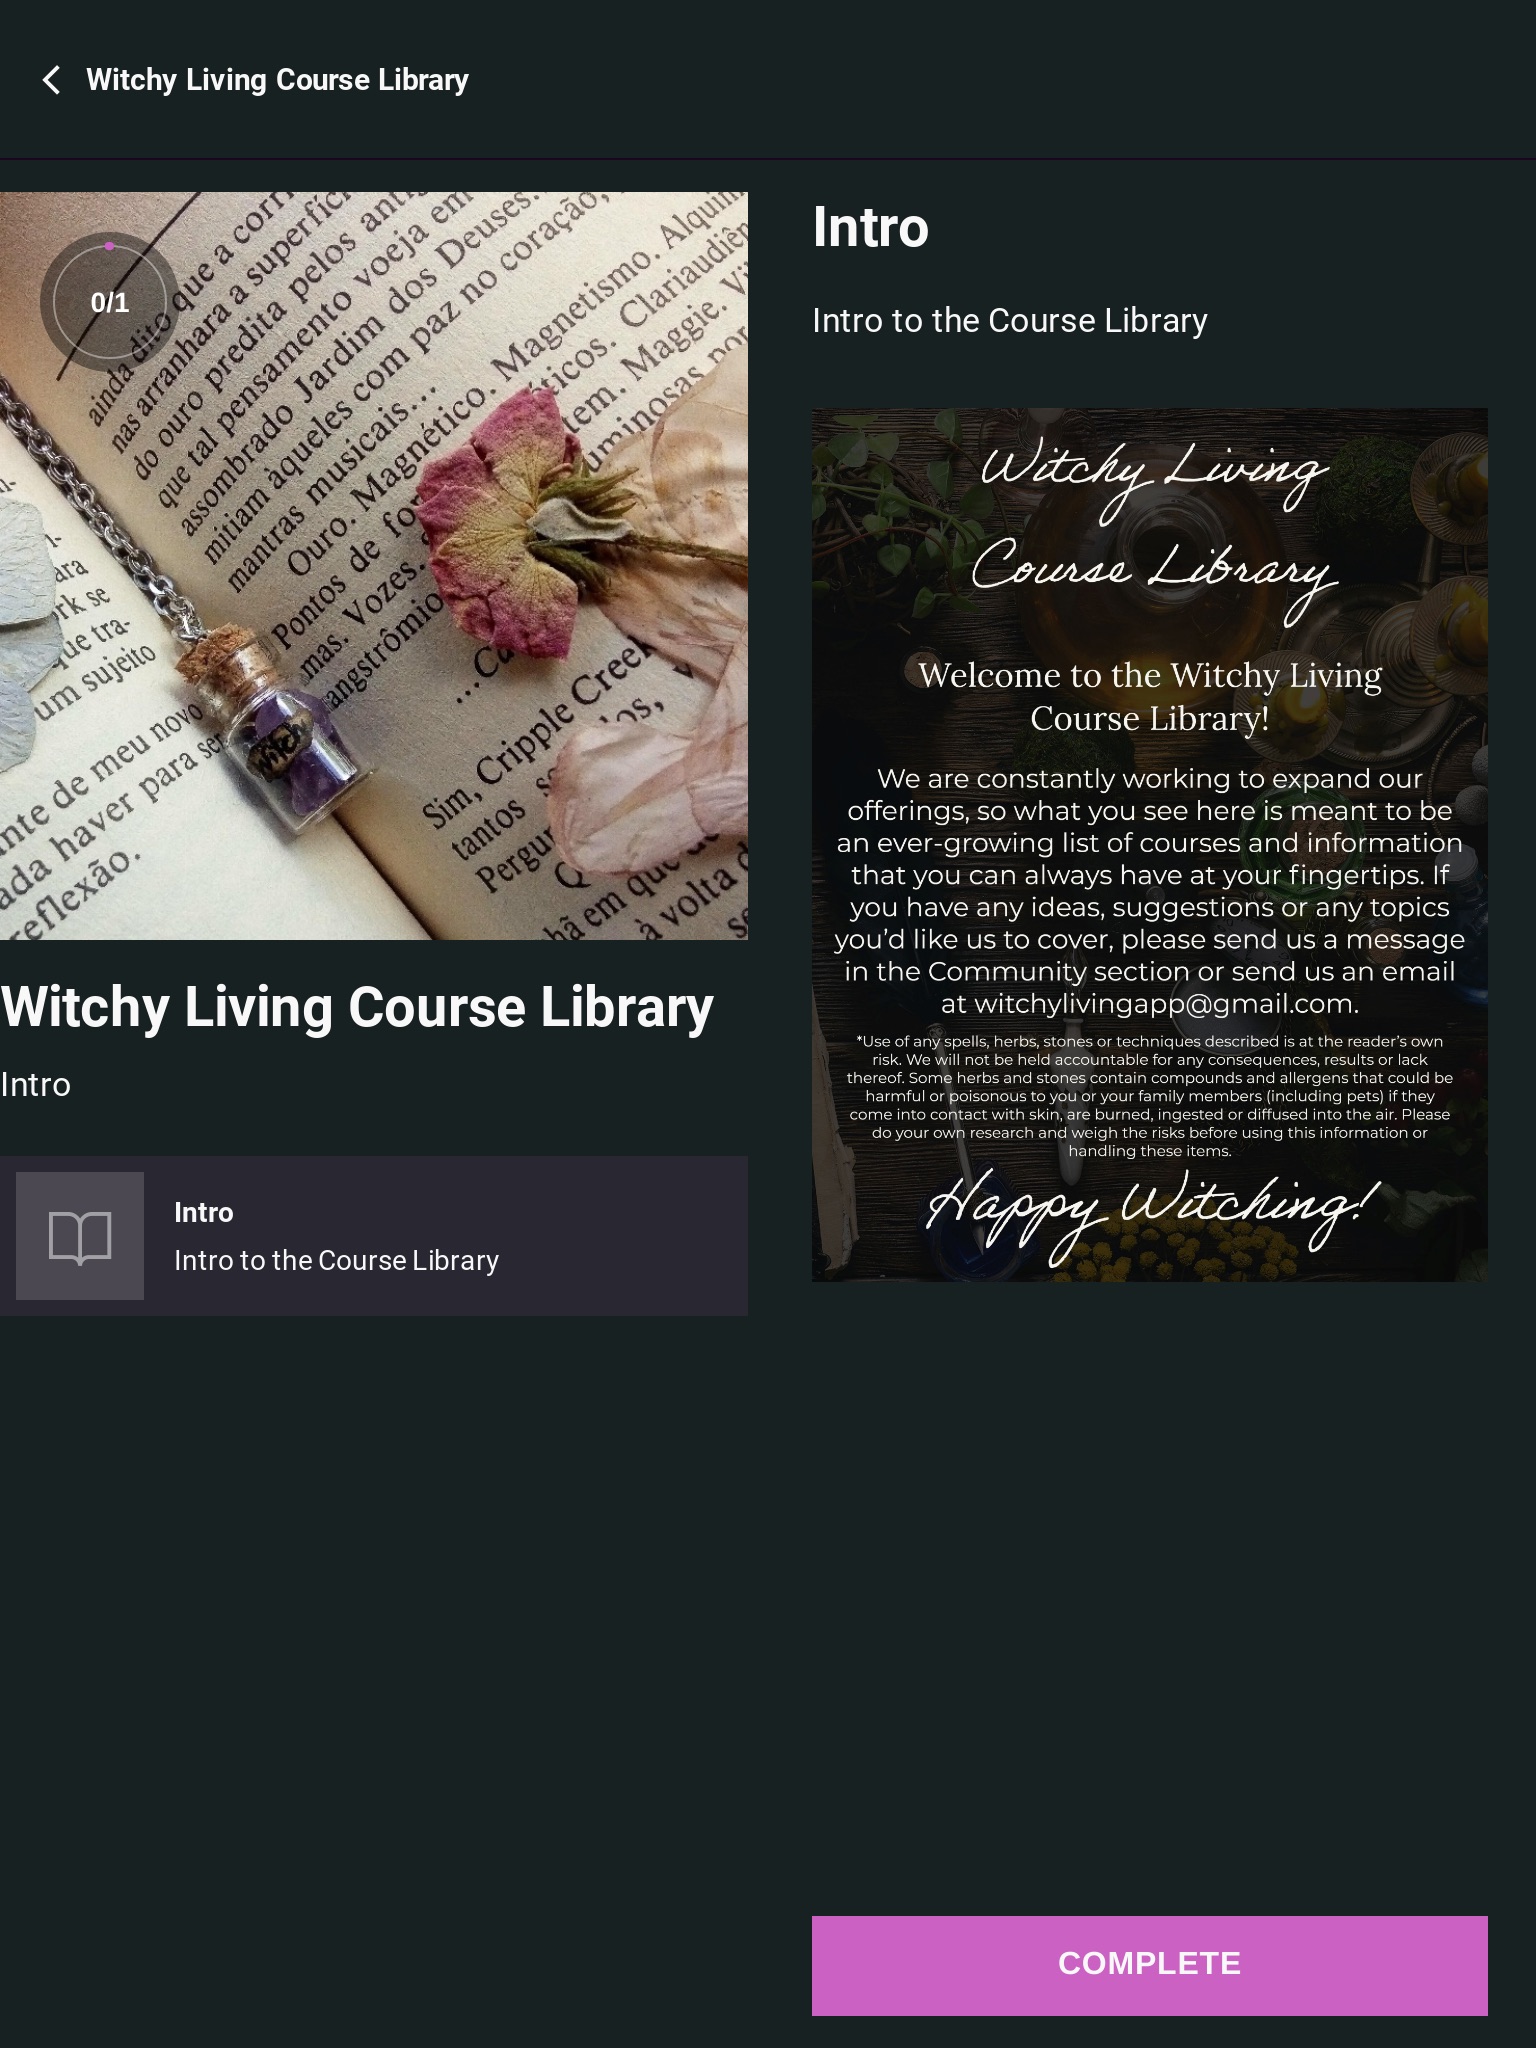 Witchy Living screenshot 3